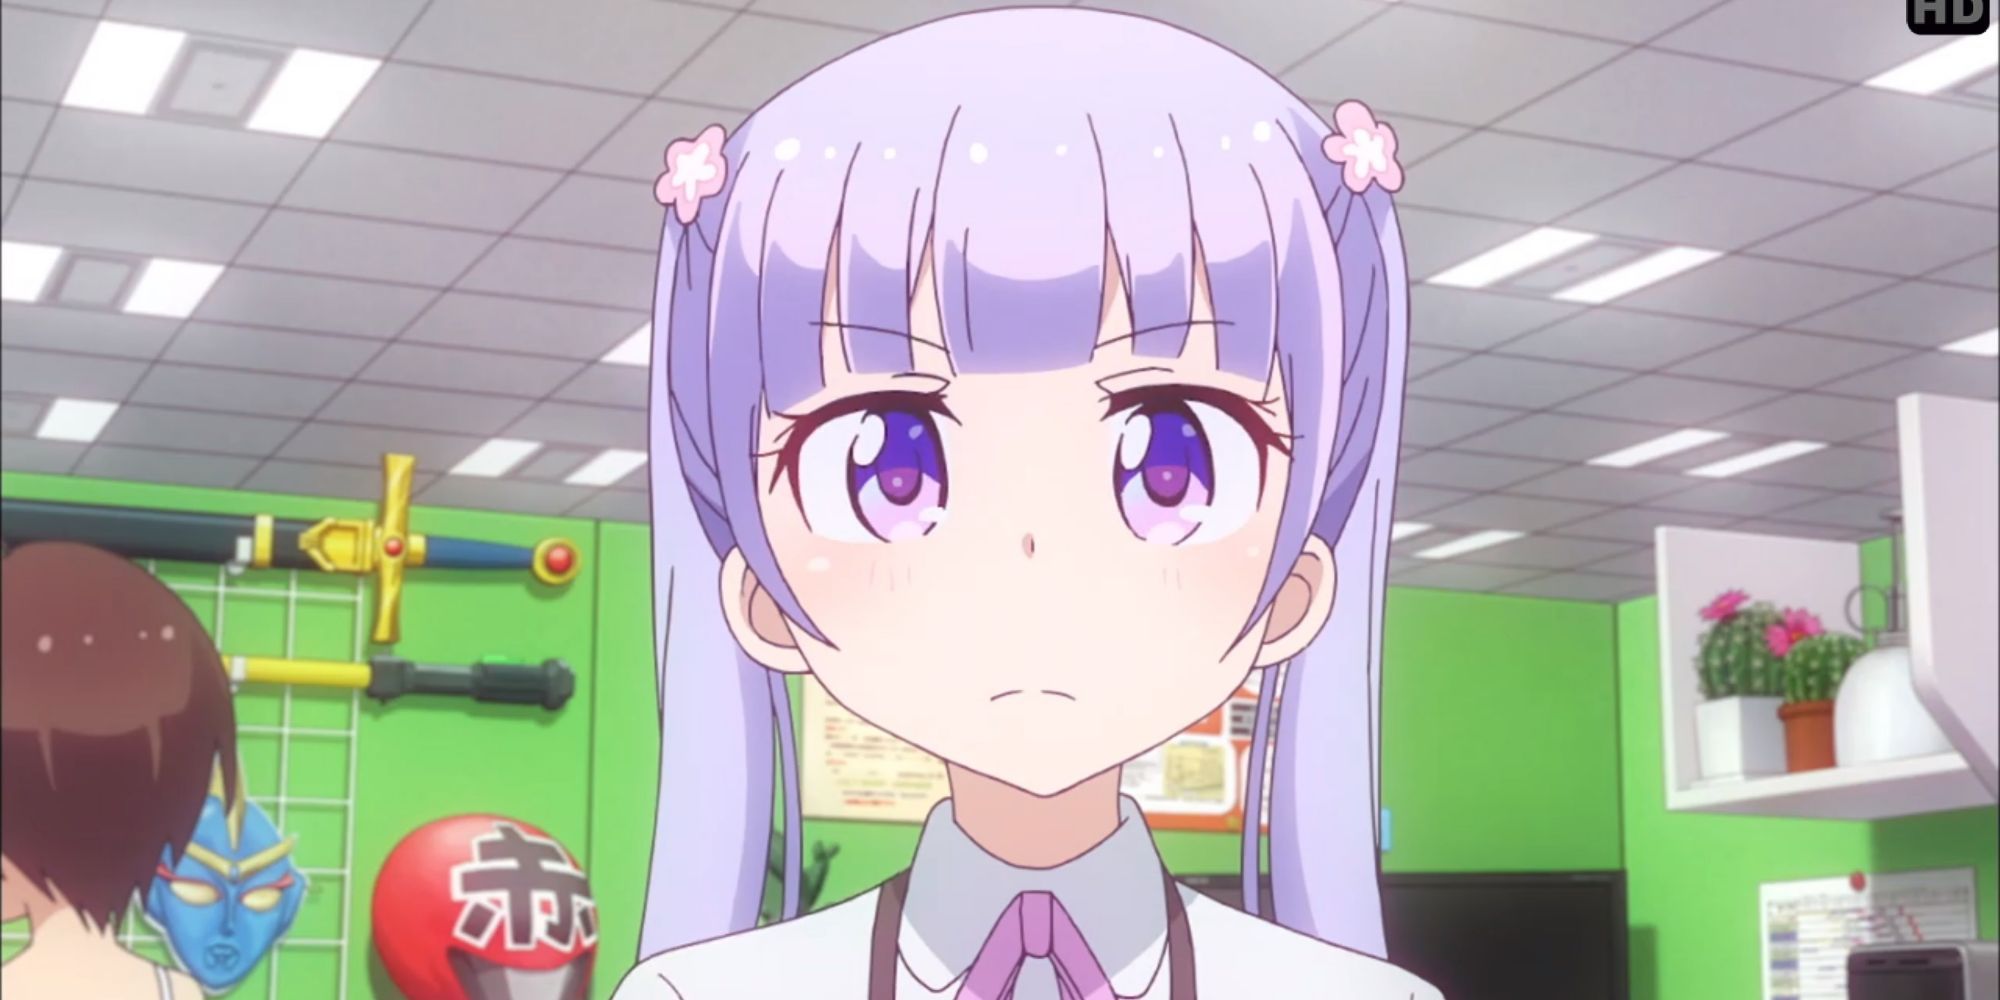 Close-up of a character from New Game anime in an office